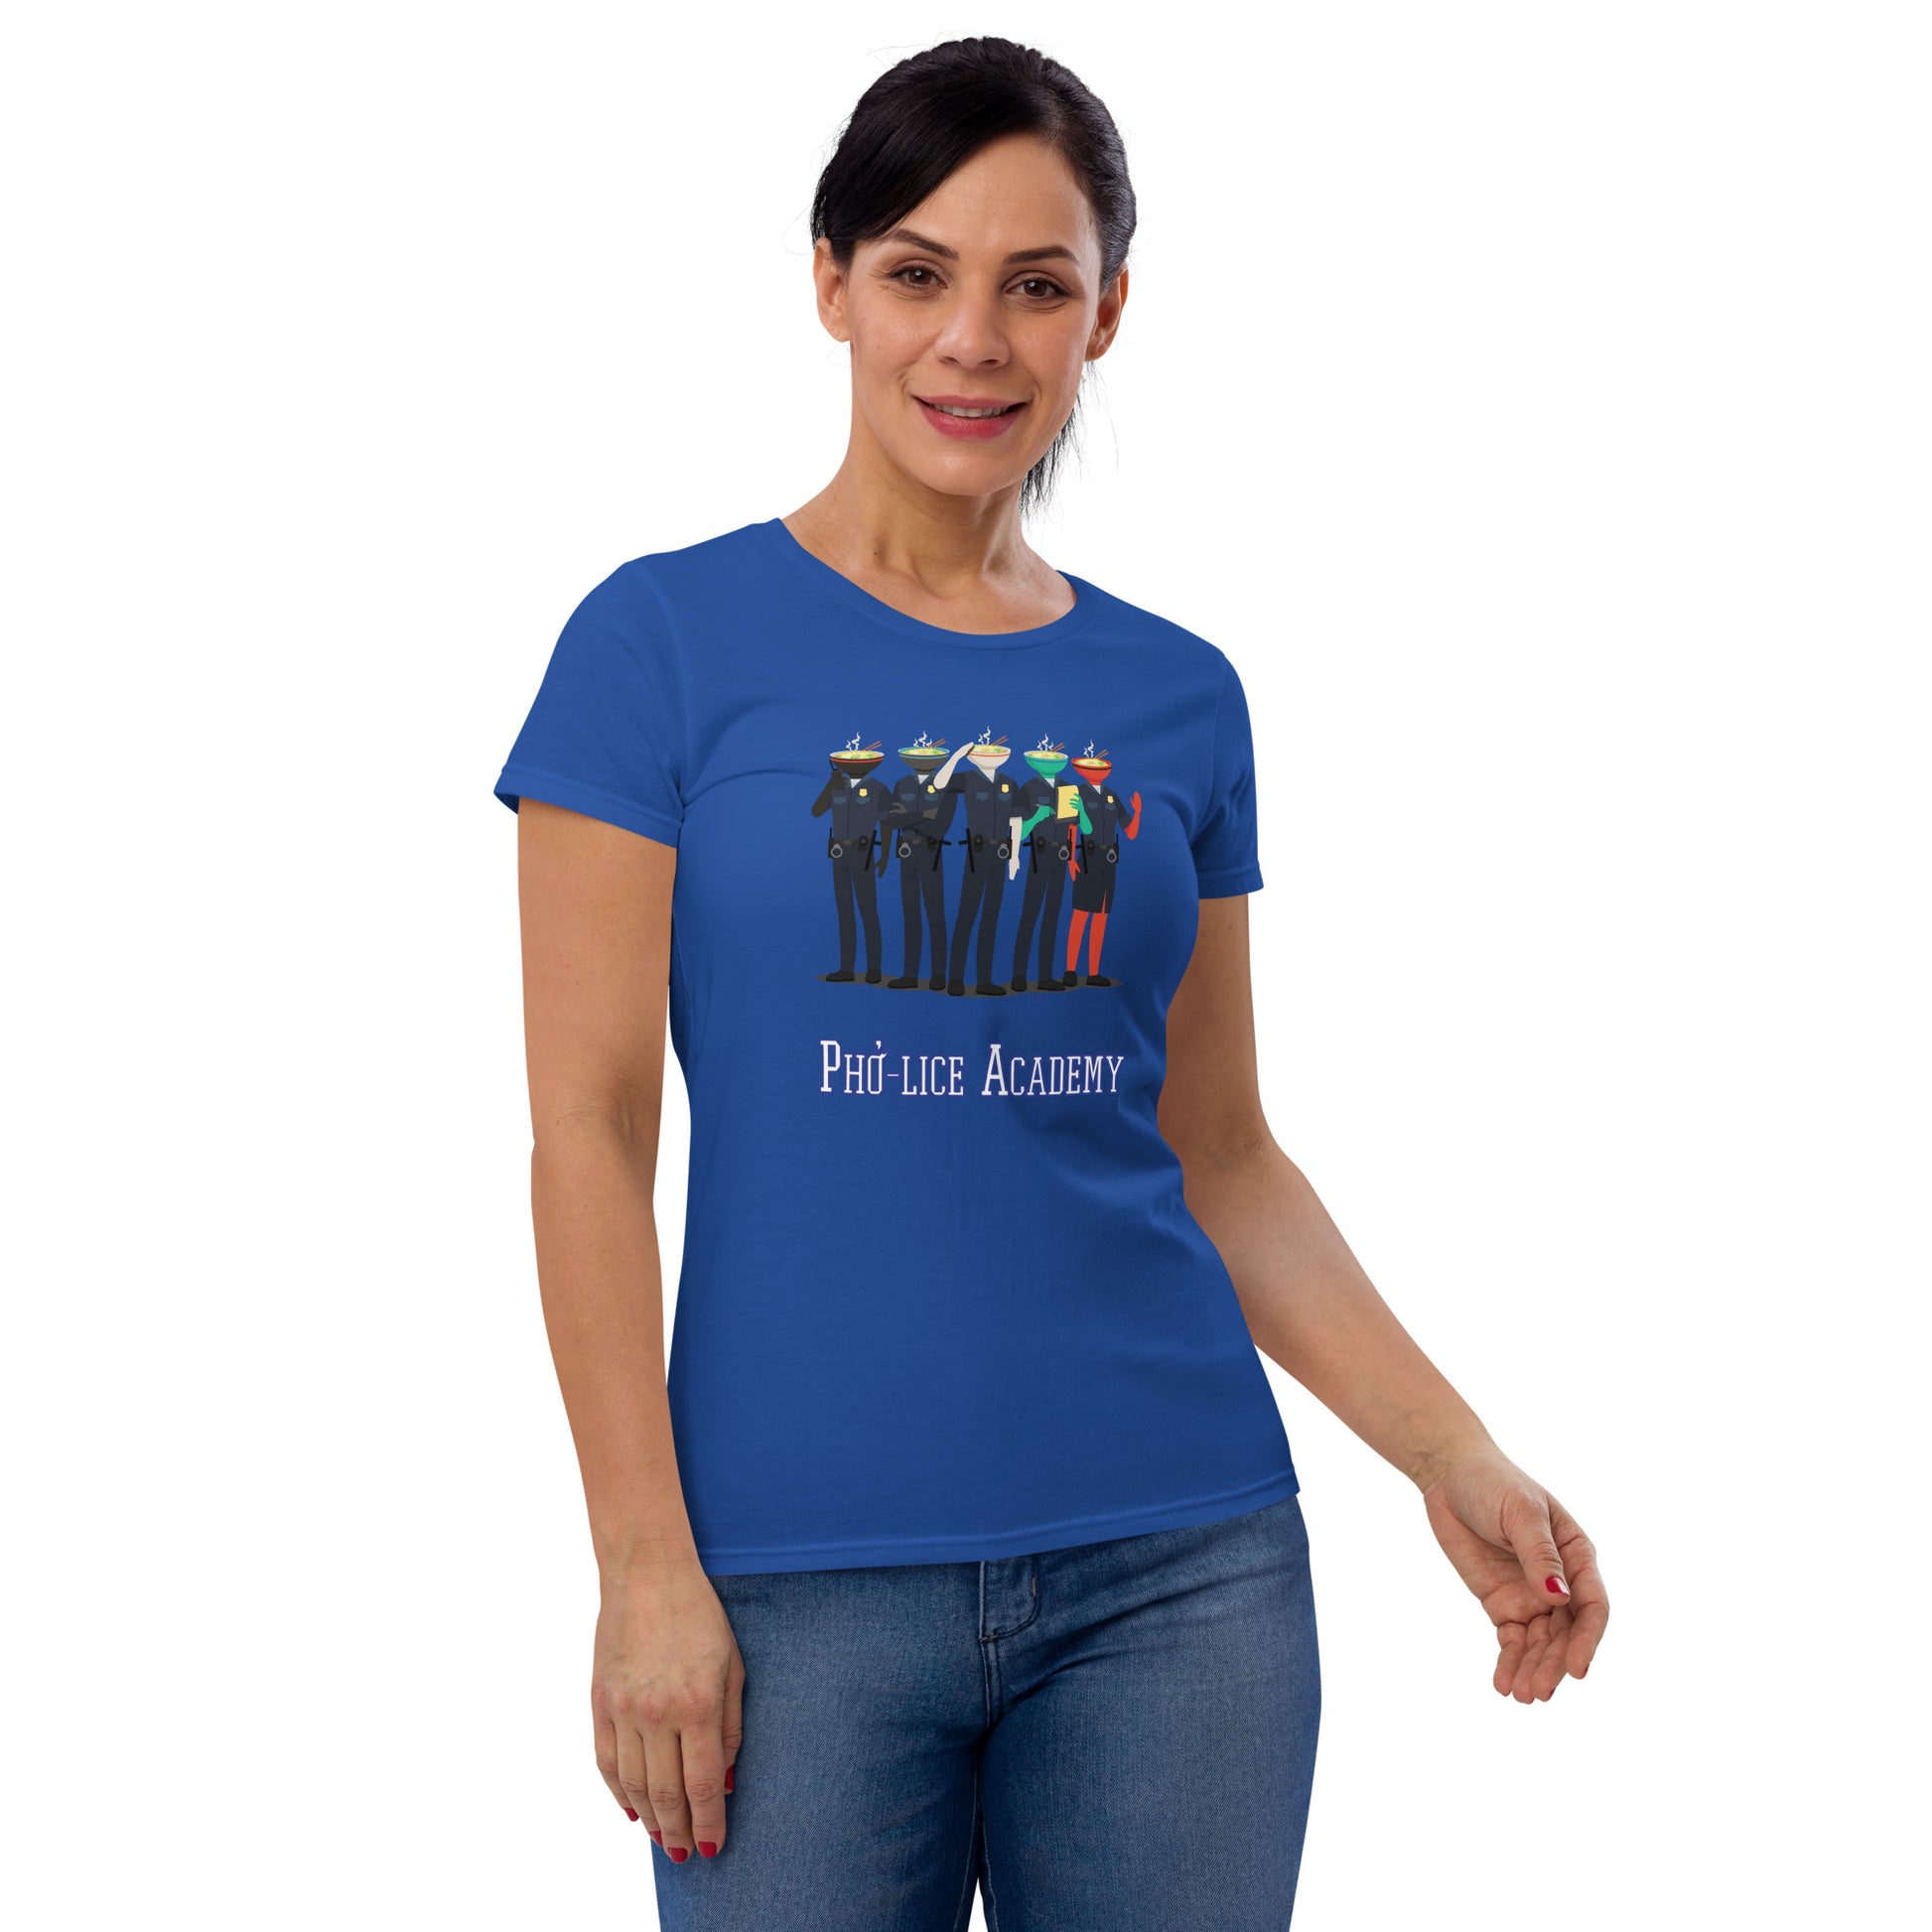 Movie The Food - Pho-lice Academy Women's T-Shirt - Royal Blue - Model Front